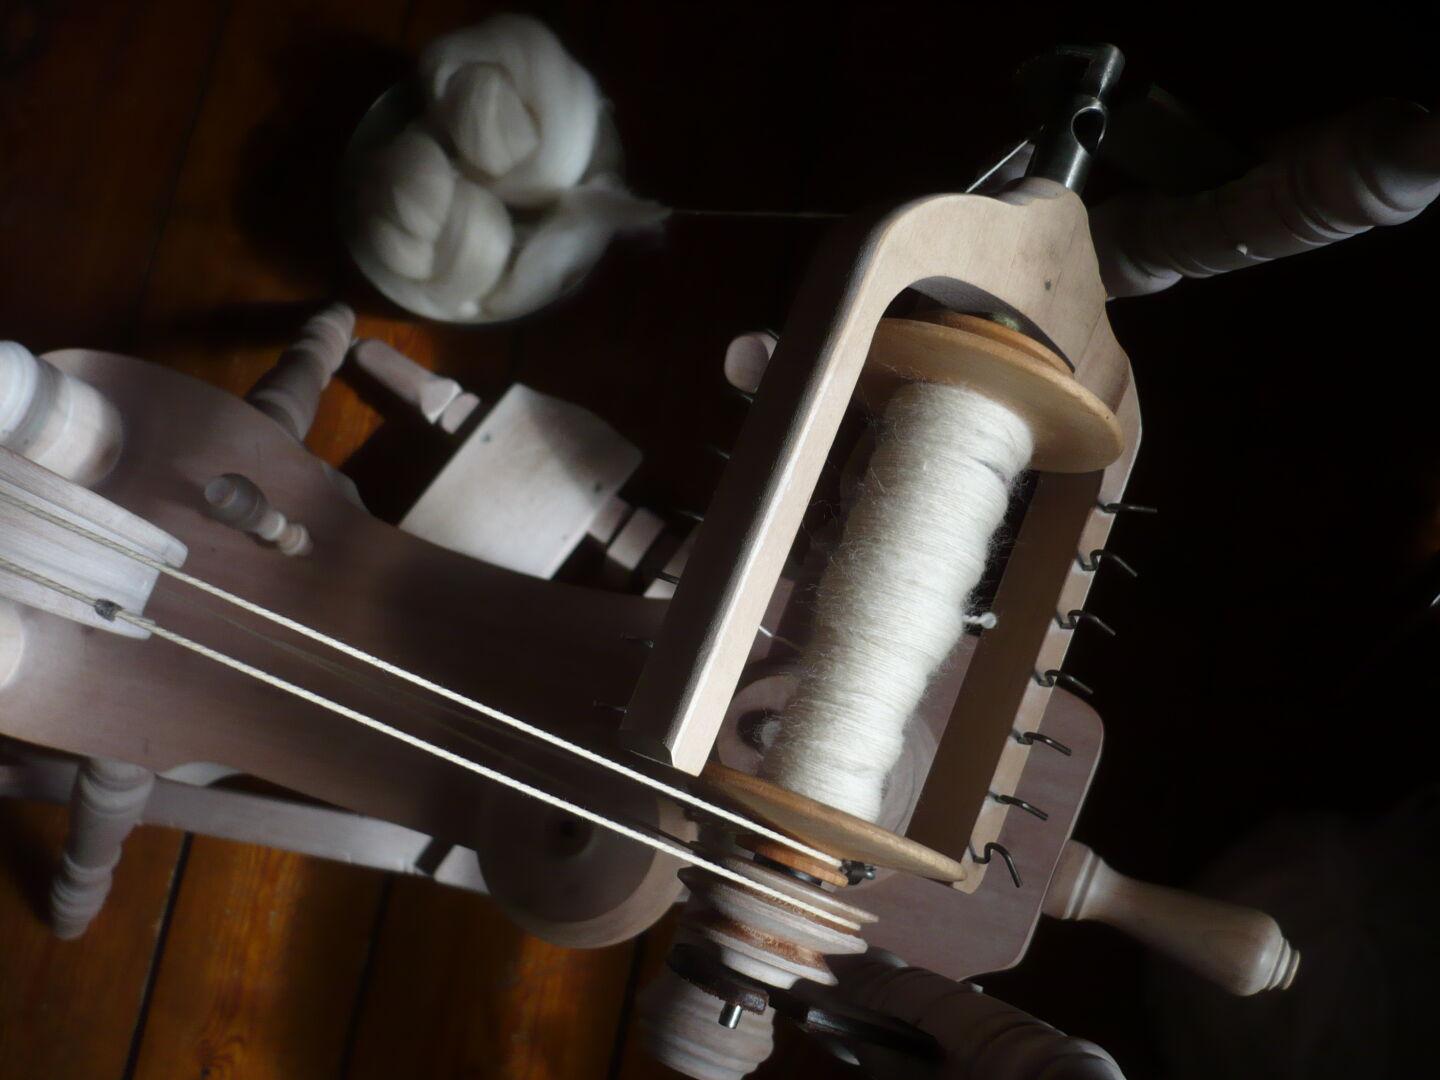 spinning wheel from above showing natural white handspun yarn on the bobbin, more fibre in the background on the floor.